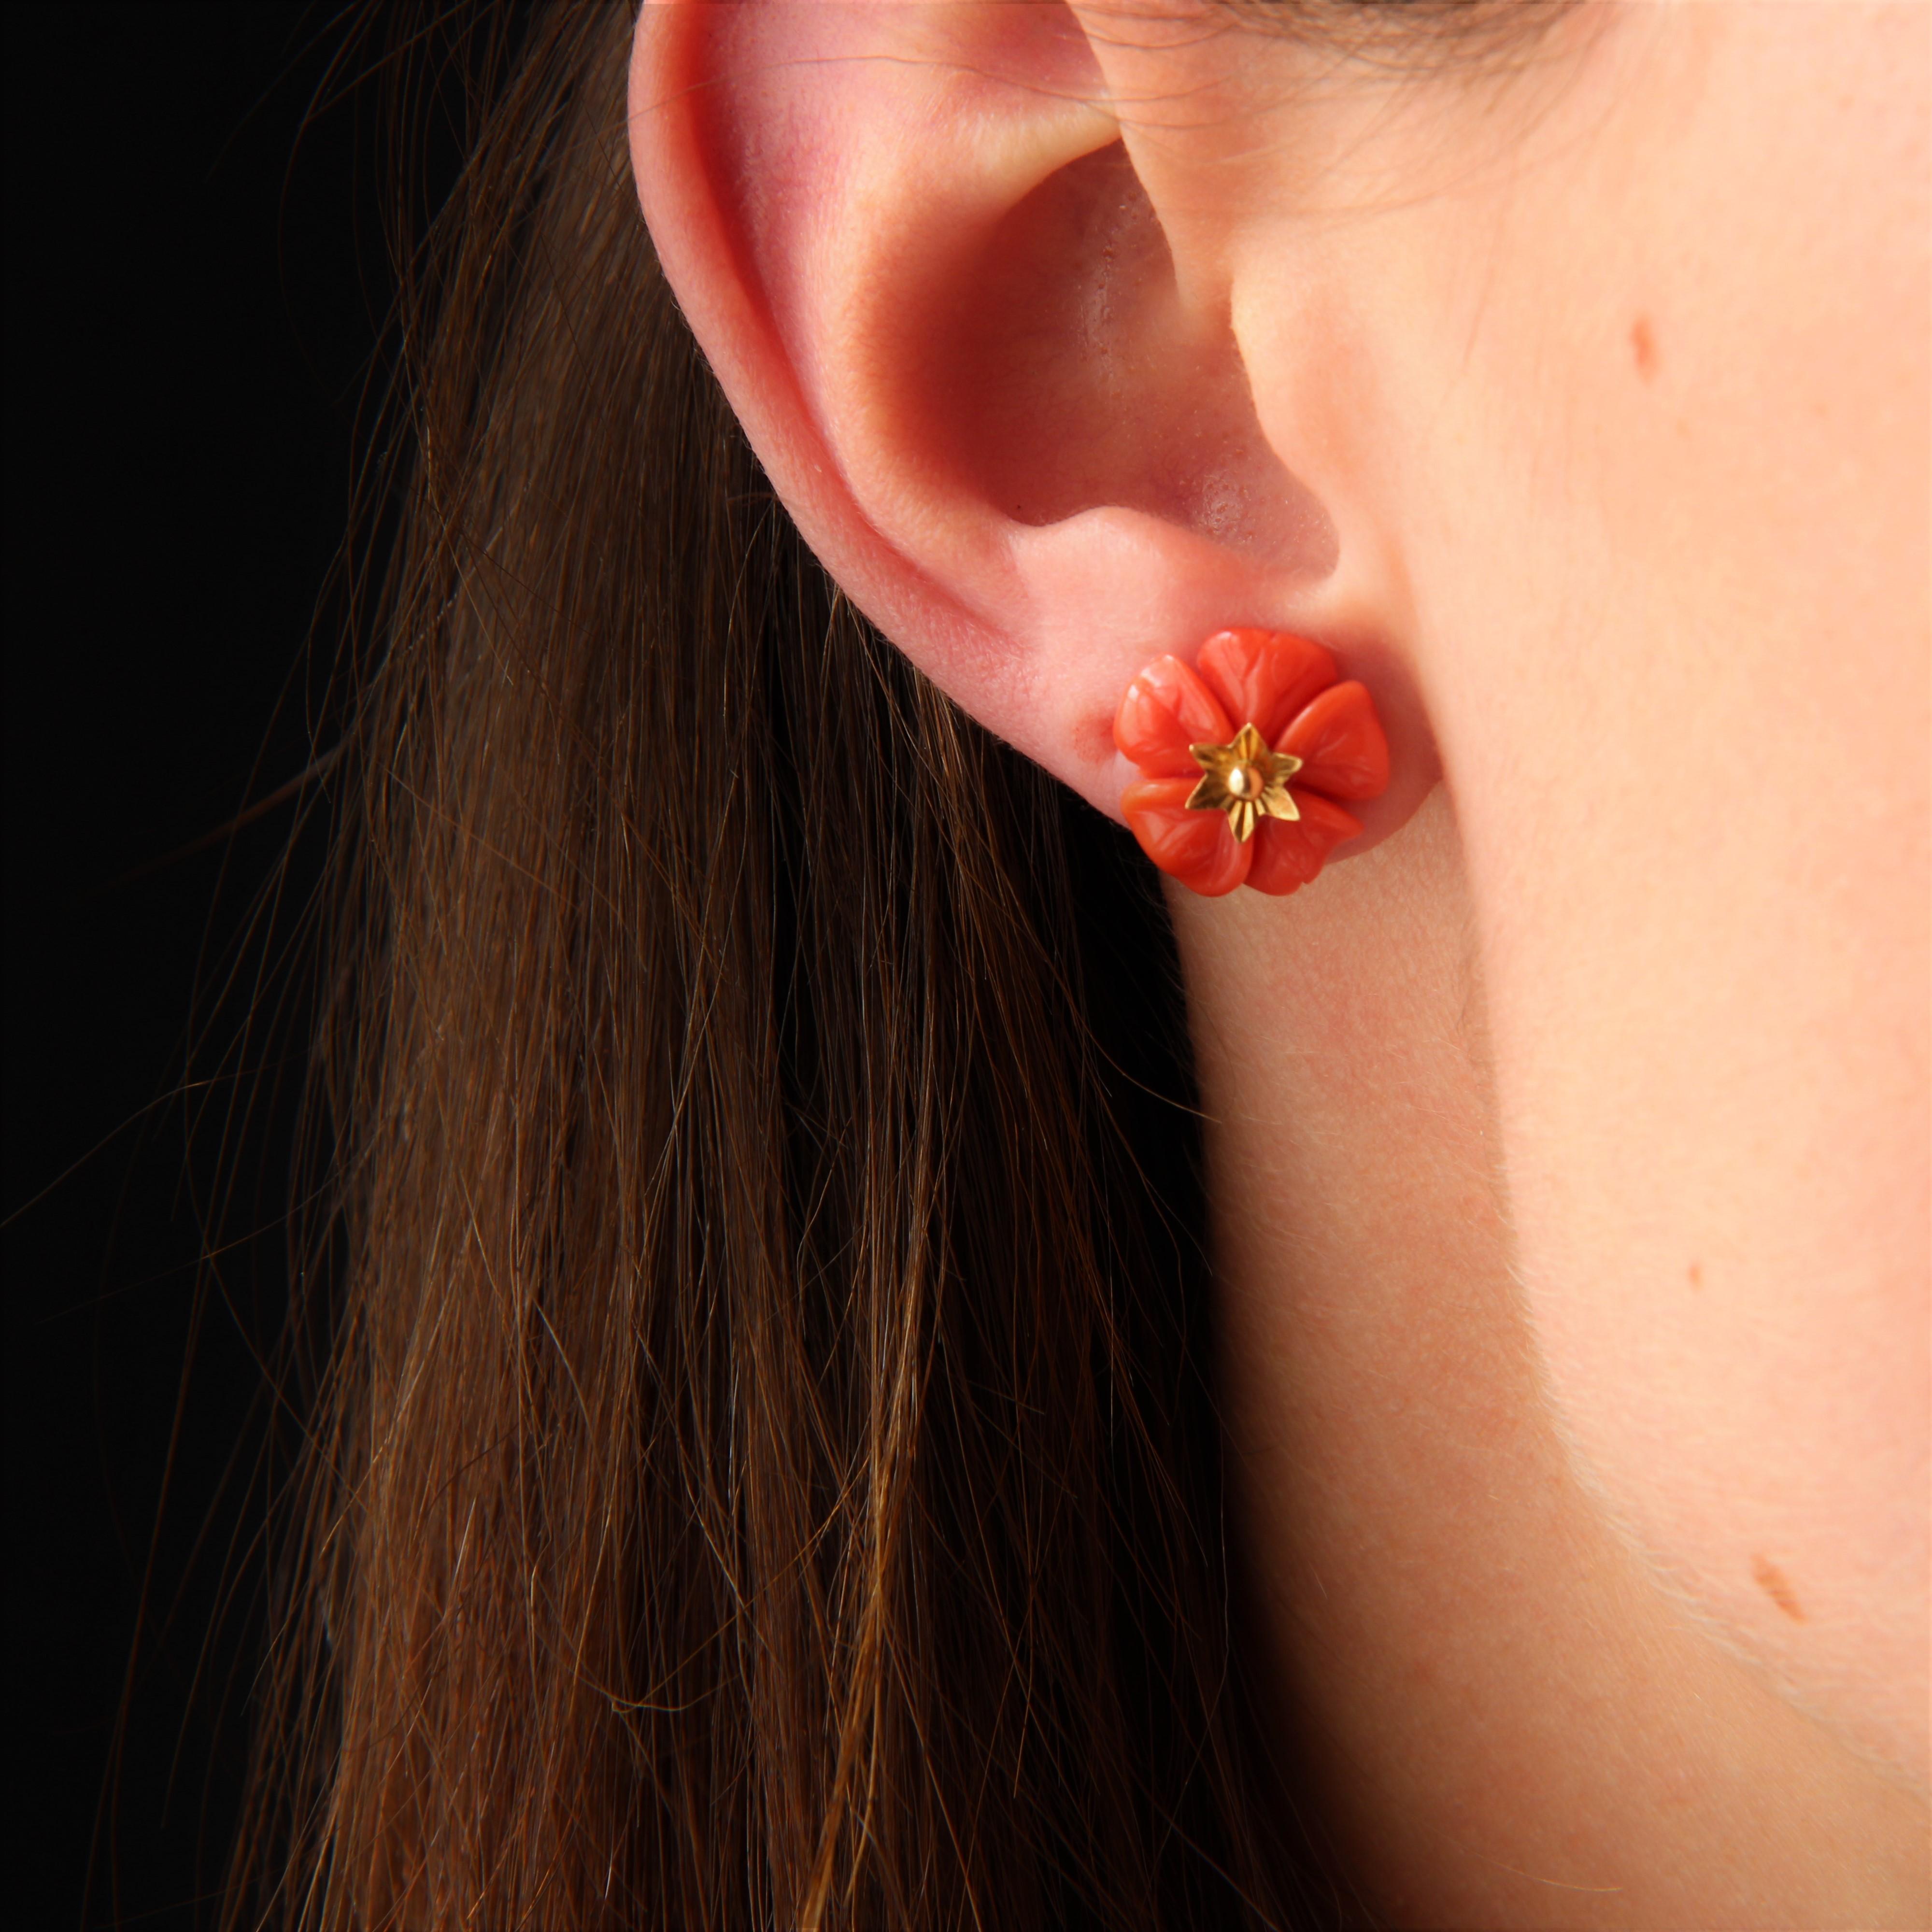 For pierced ears.
Earrings in 18 karat yellow gold.
These coral and gold earrings feature an engraved coral flower, pierced by an ear stud decorated with a small chased gold star. The clasp is a butterfly clasp.
Diameter of coral flower :14 mm